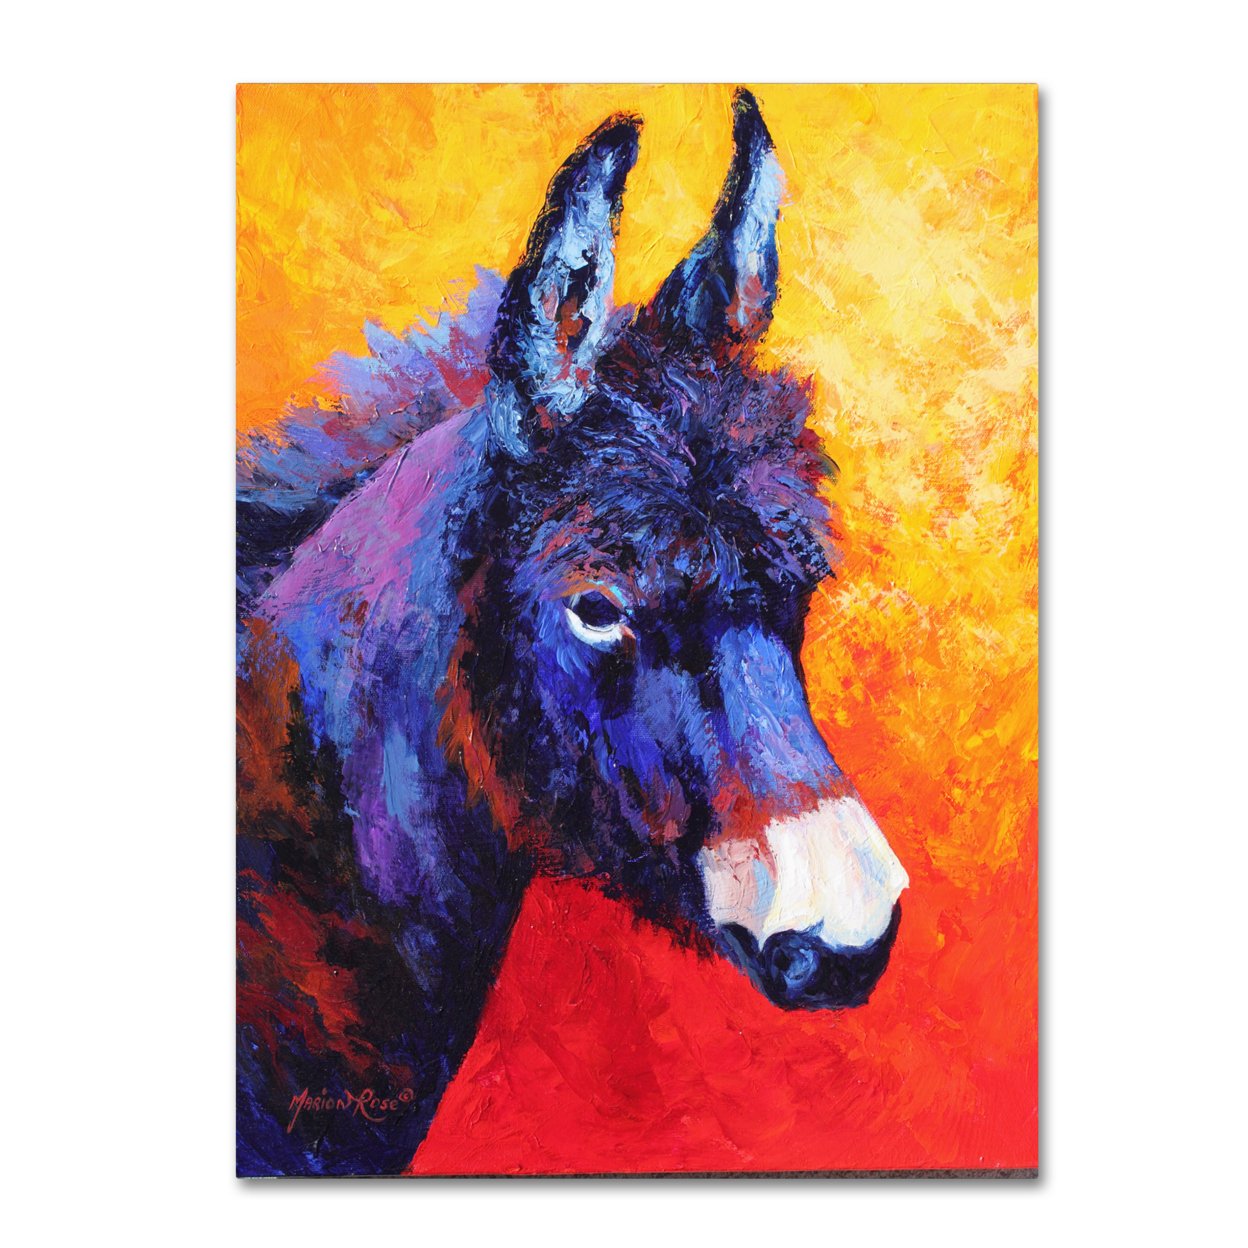 Marion Rose 'Donkey IVX' Ready To Hang Canvas Art 35 X 47 Inches Made In USA